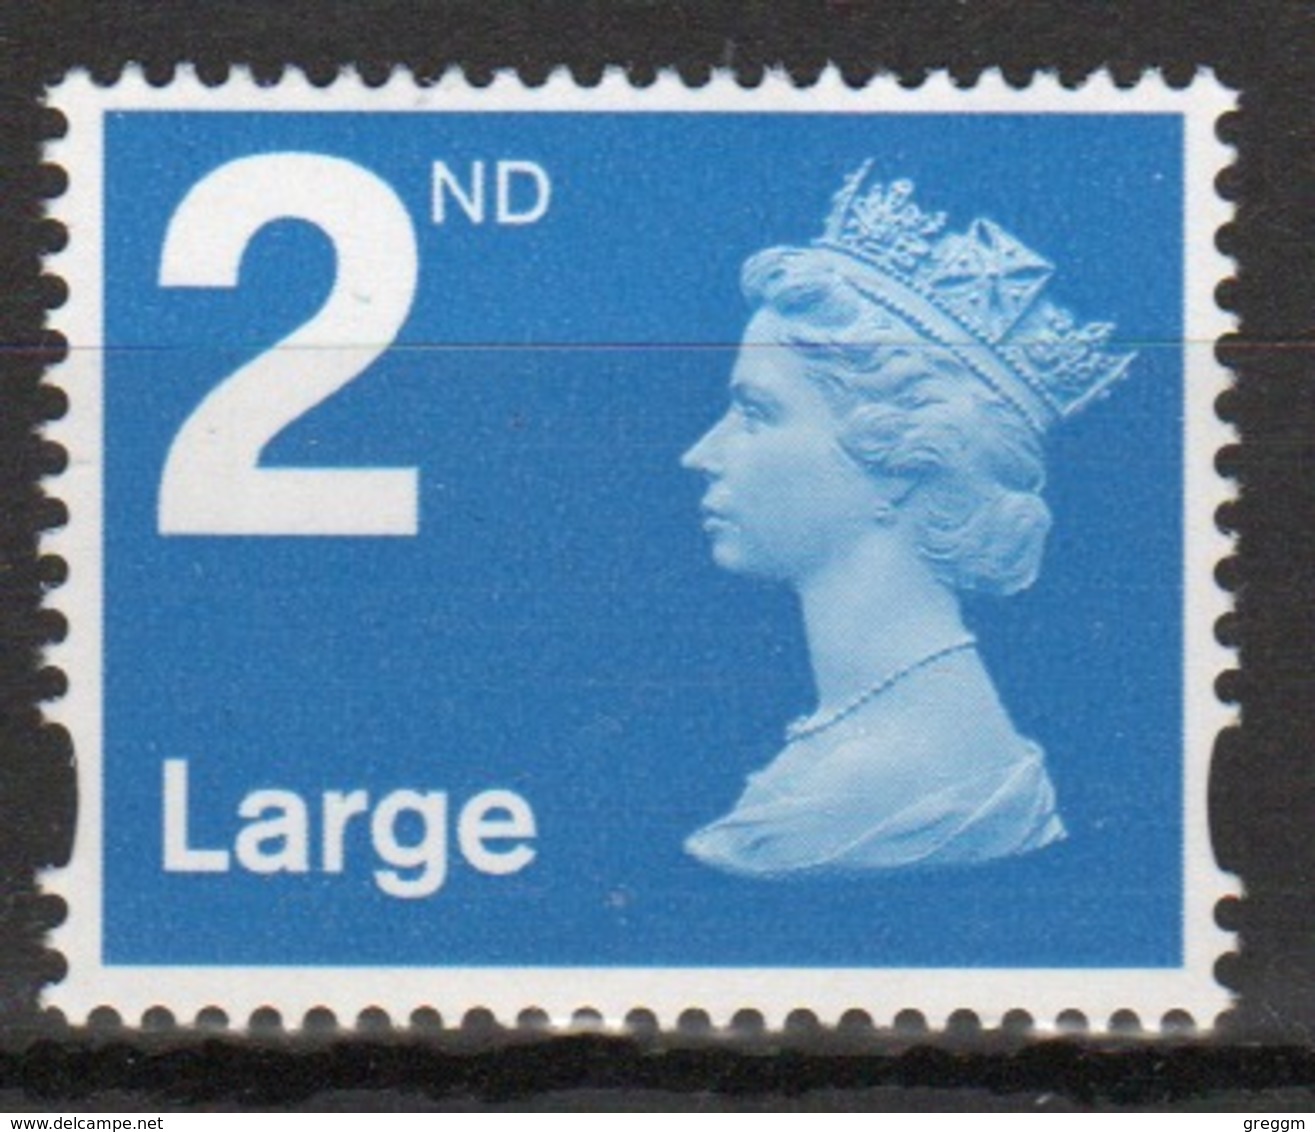 Great Britain 2006 Decimal Machin 2nd Large Définitive Stamp. - Unused Stamps